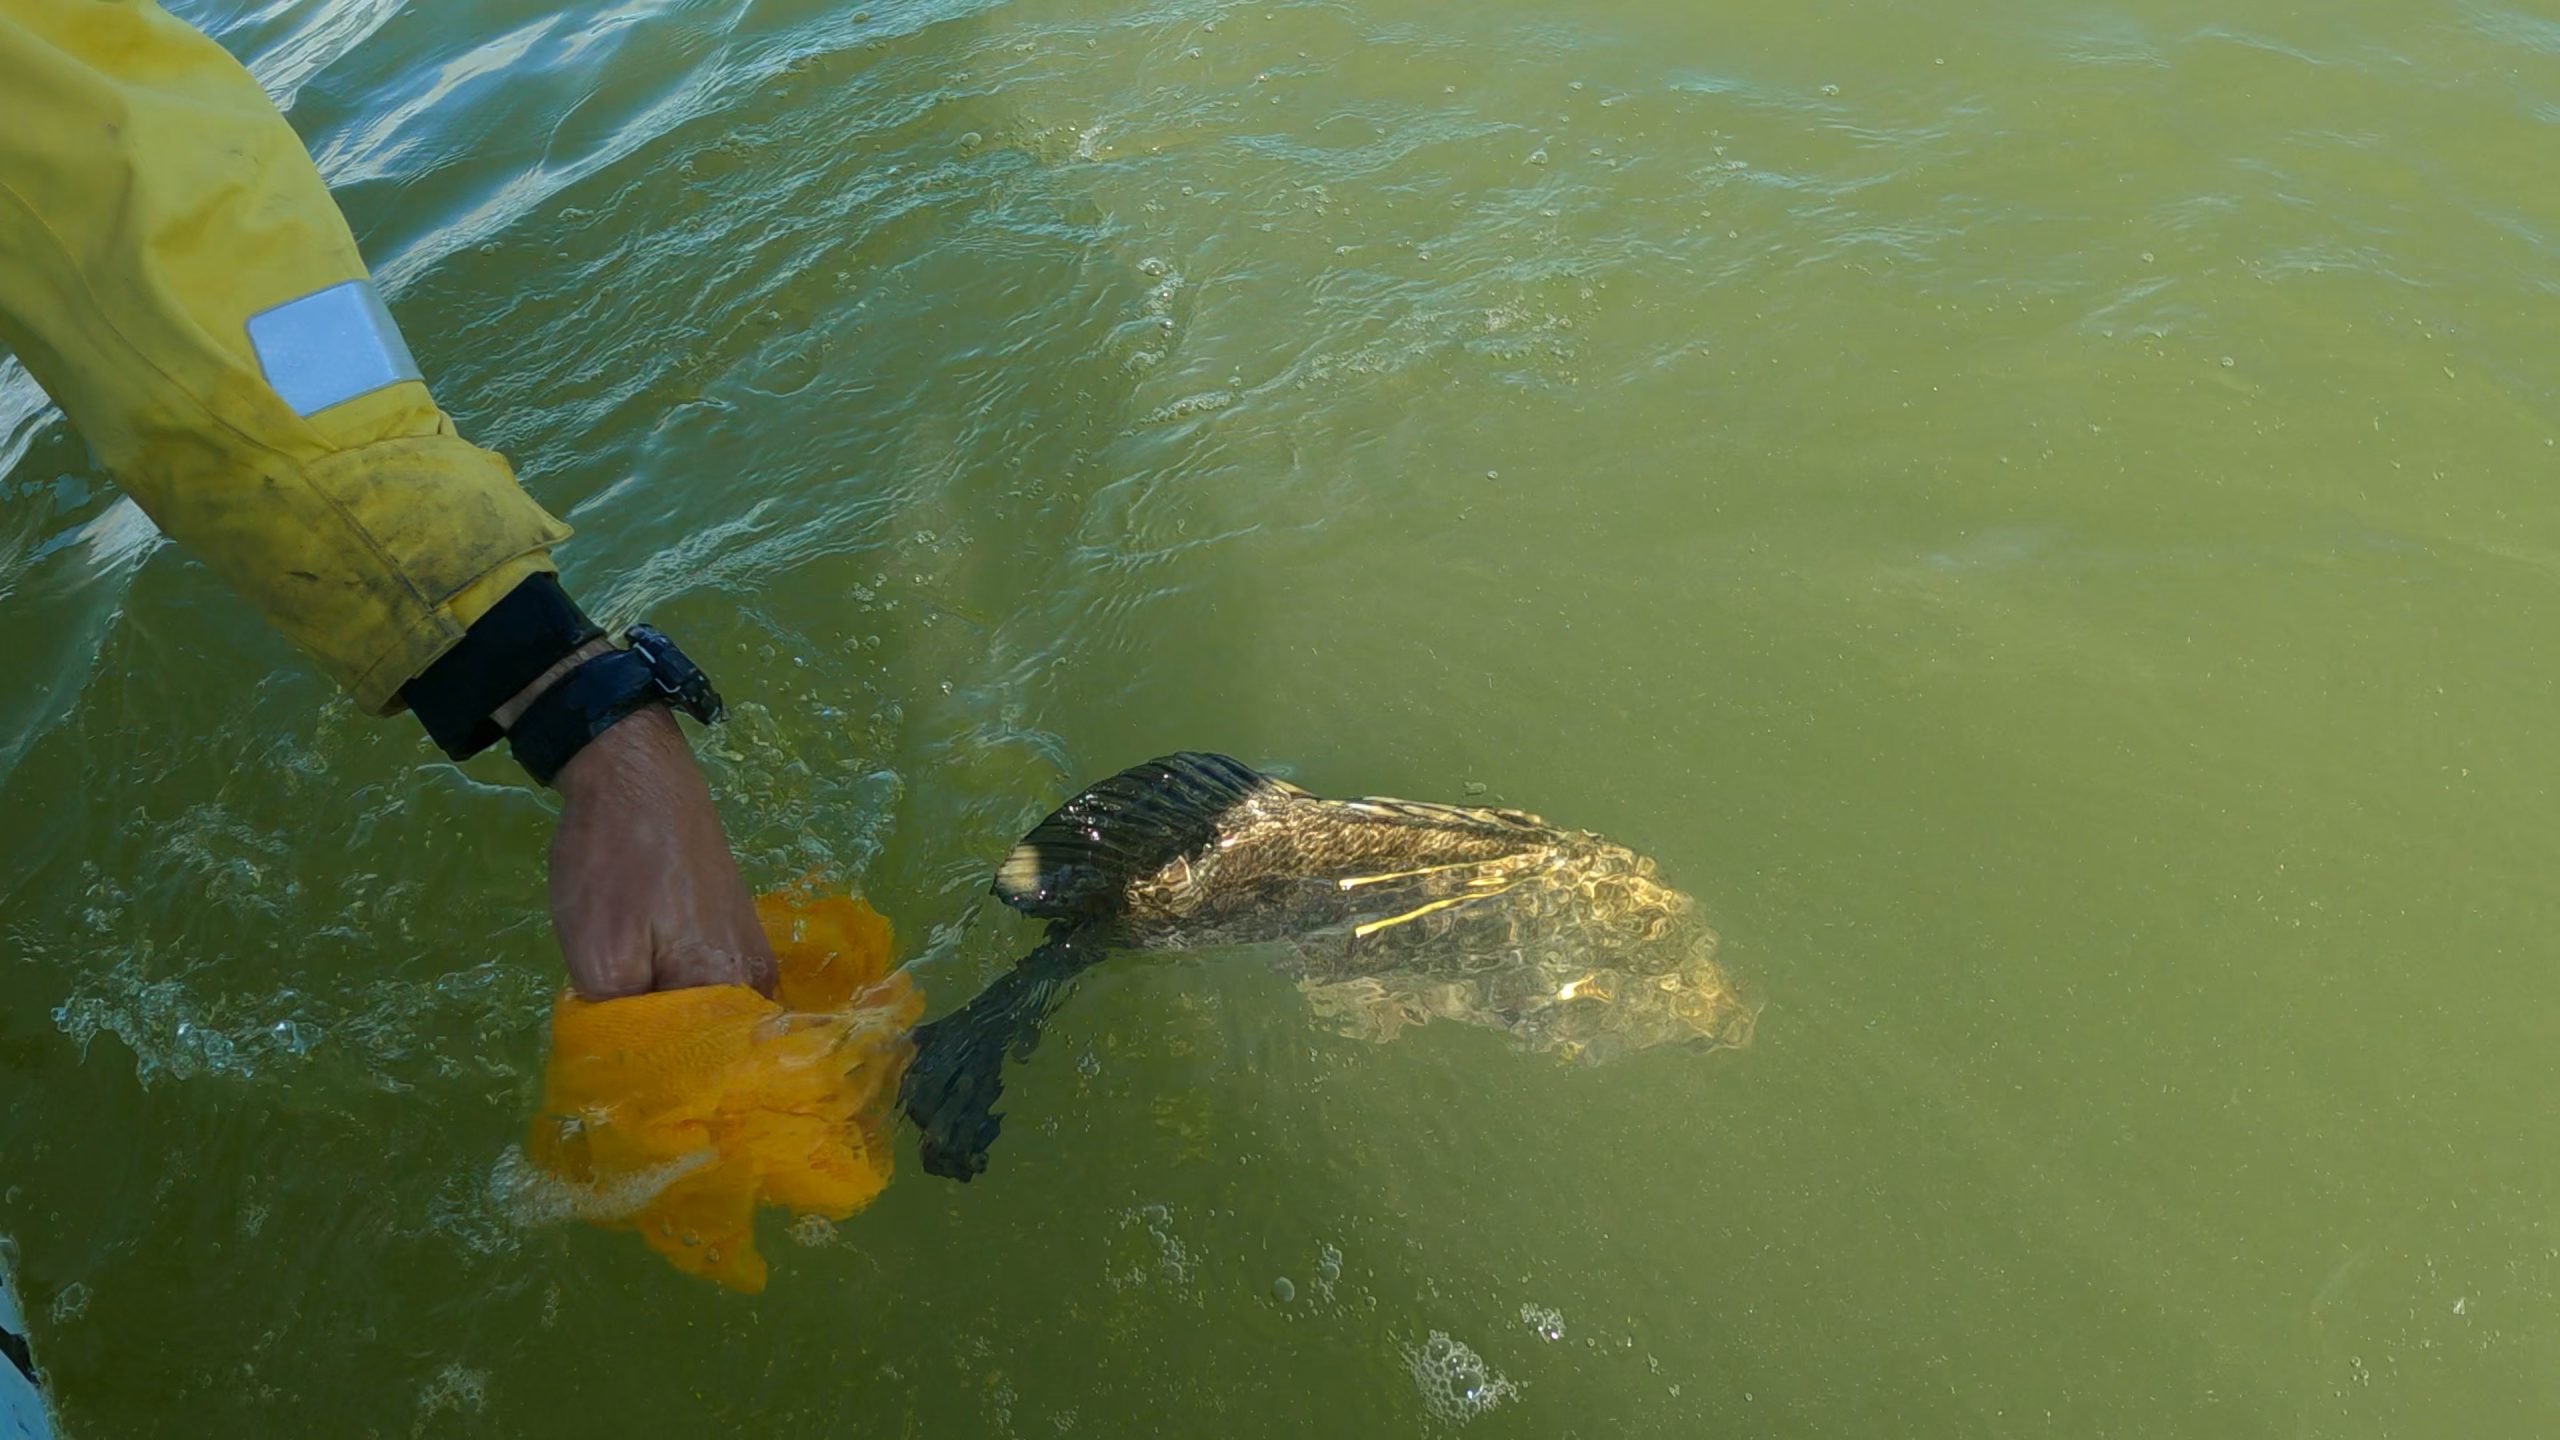 Tripletail Tagging & Research with Gulf Coast Marine Scientists & Commission